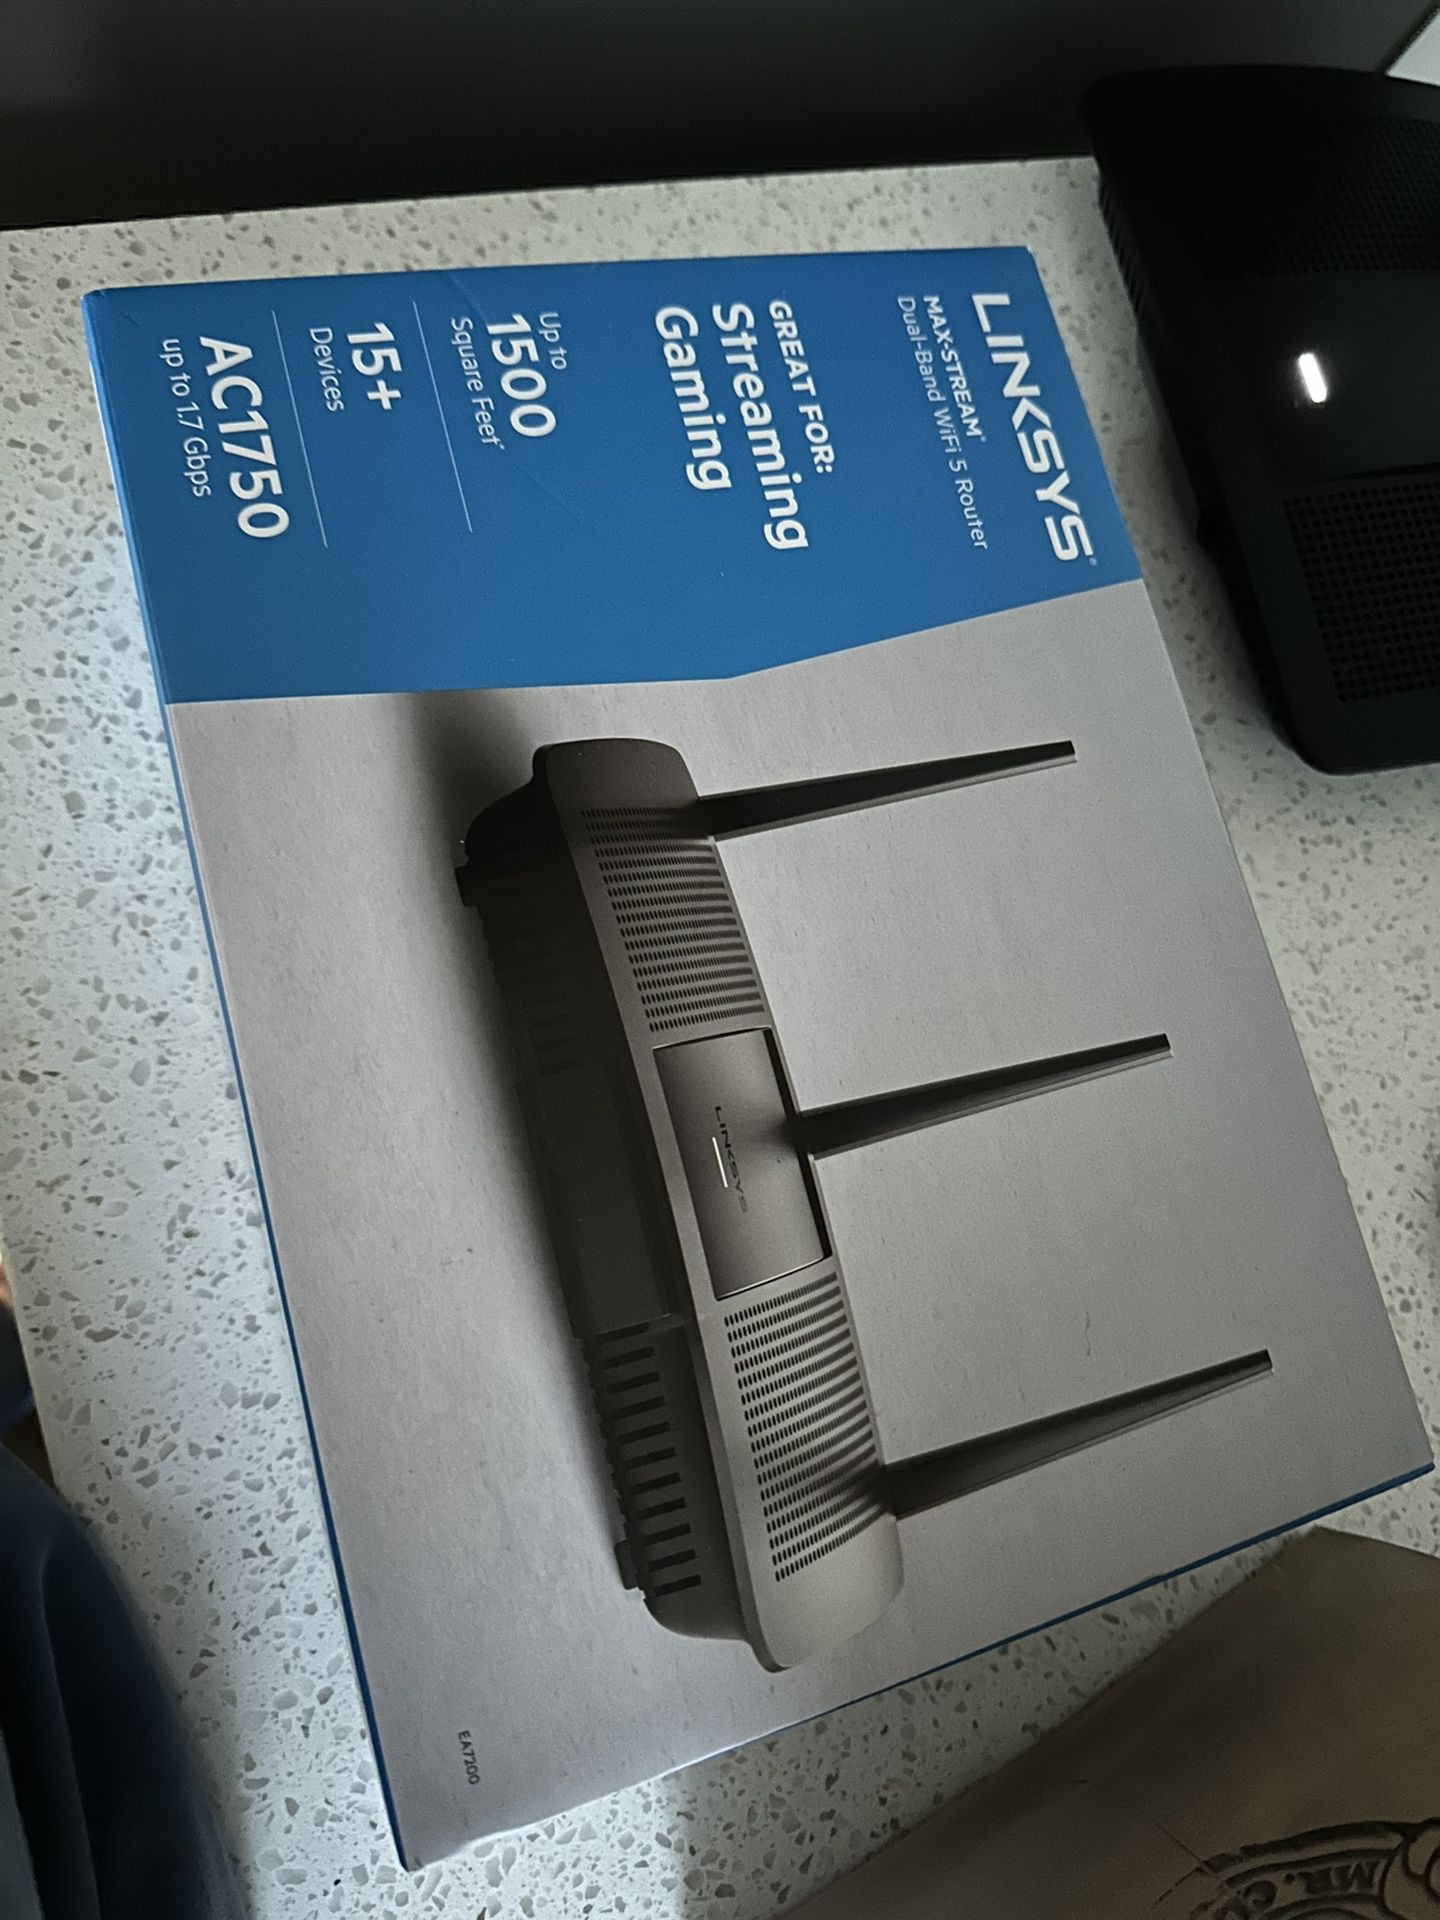 Linksys Wifi Router 